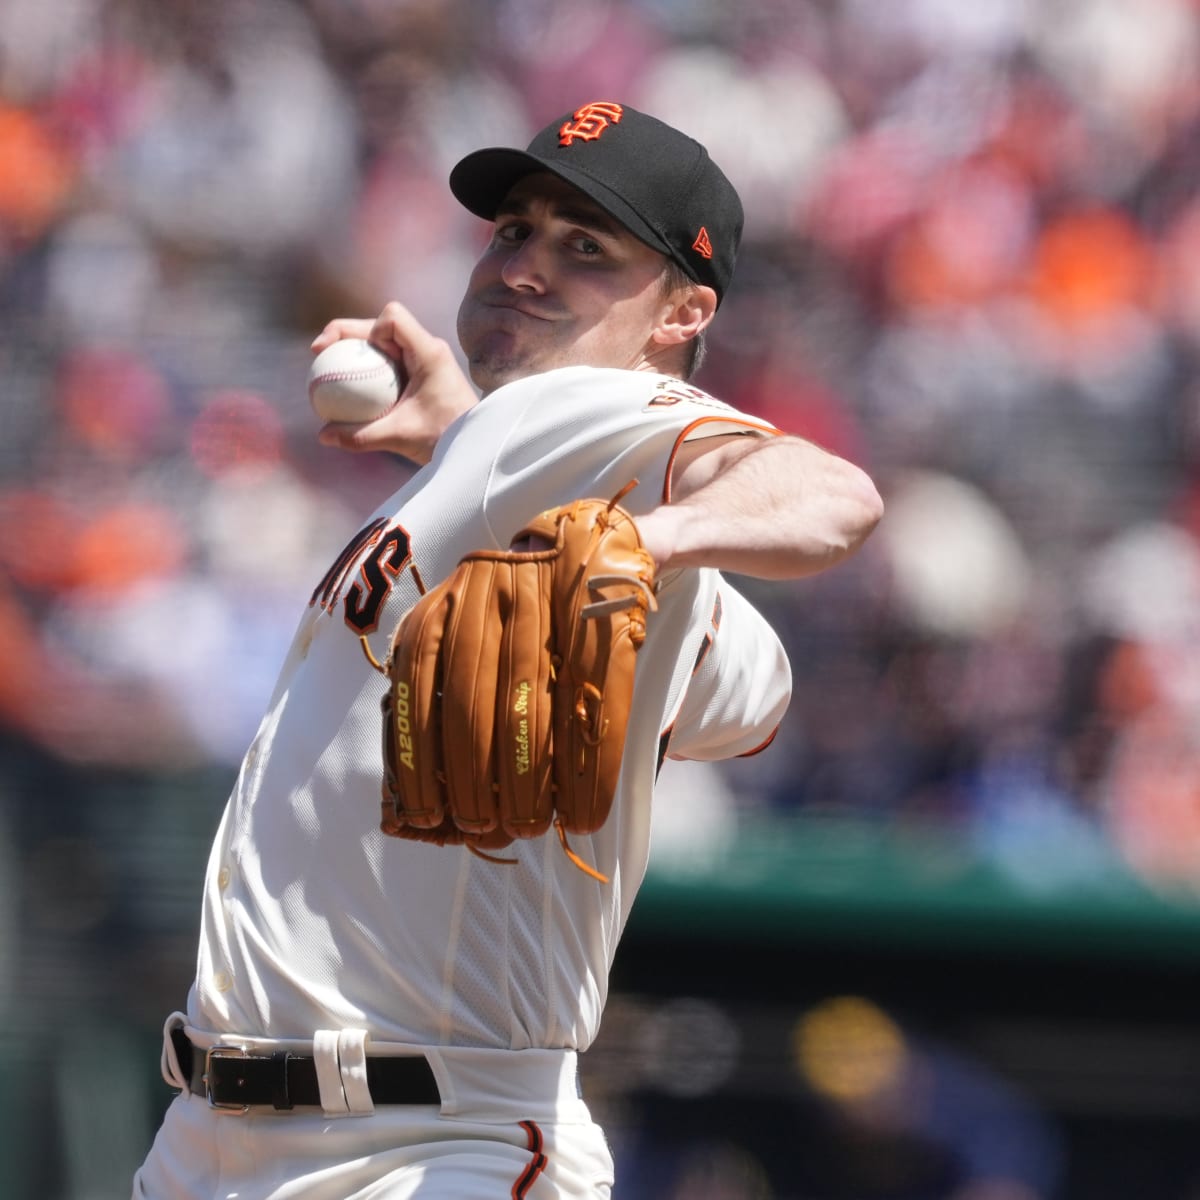 Giants fall to Padres 3-1